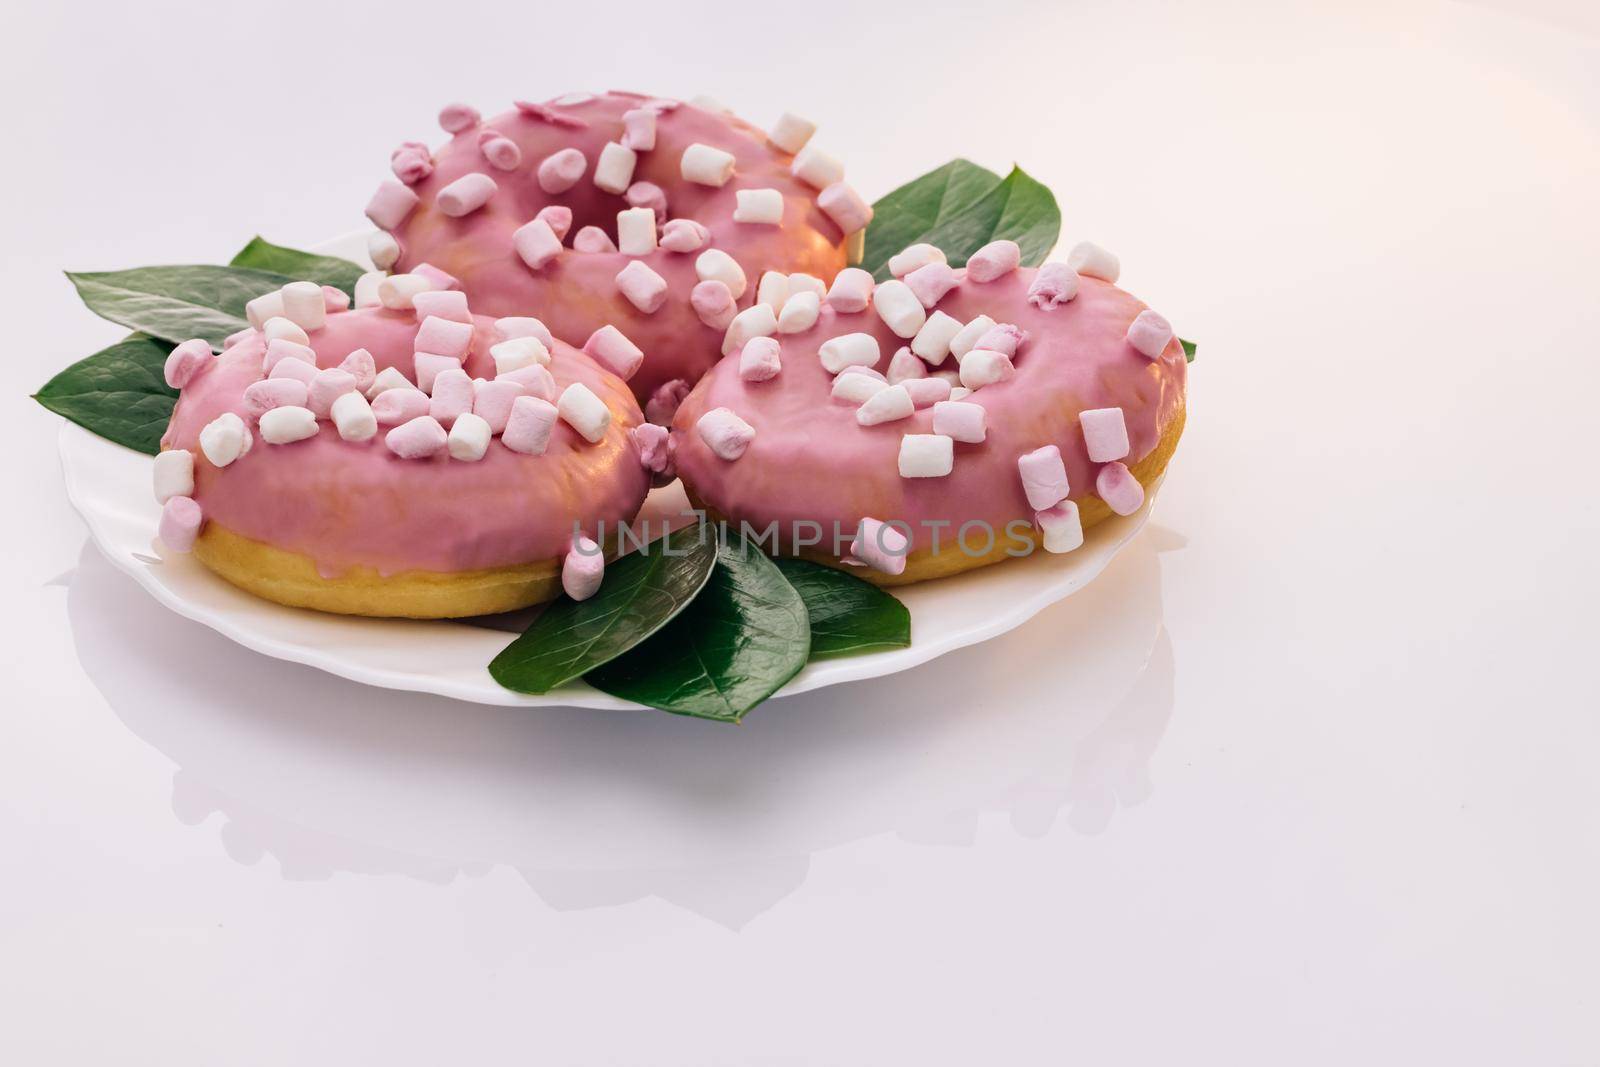 Shot of white tasty delicious sweet donut with colorful sprinkles on white background. Colorful frosted pink doughnut. Assorted donuts. Pink glazed and sprinkles donuts. Dessert.